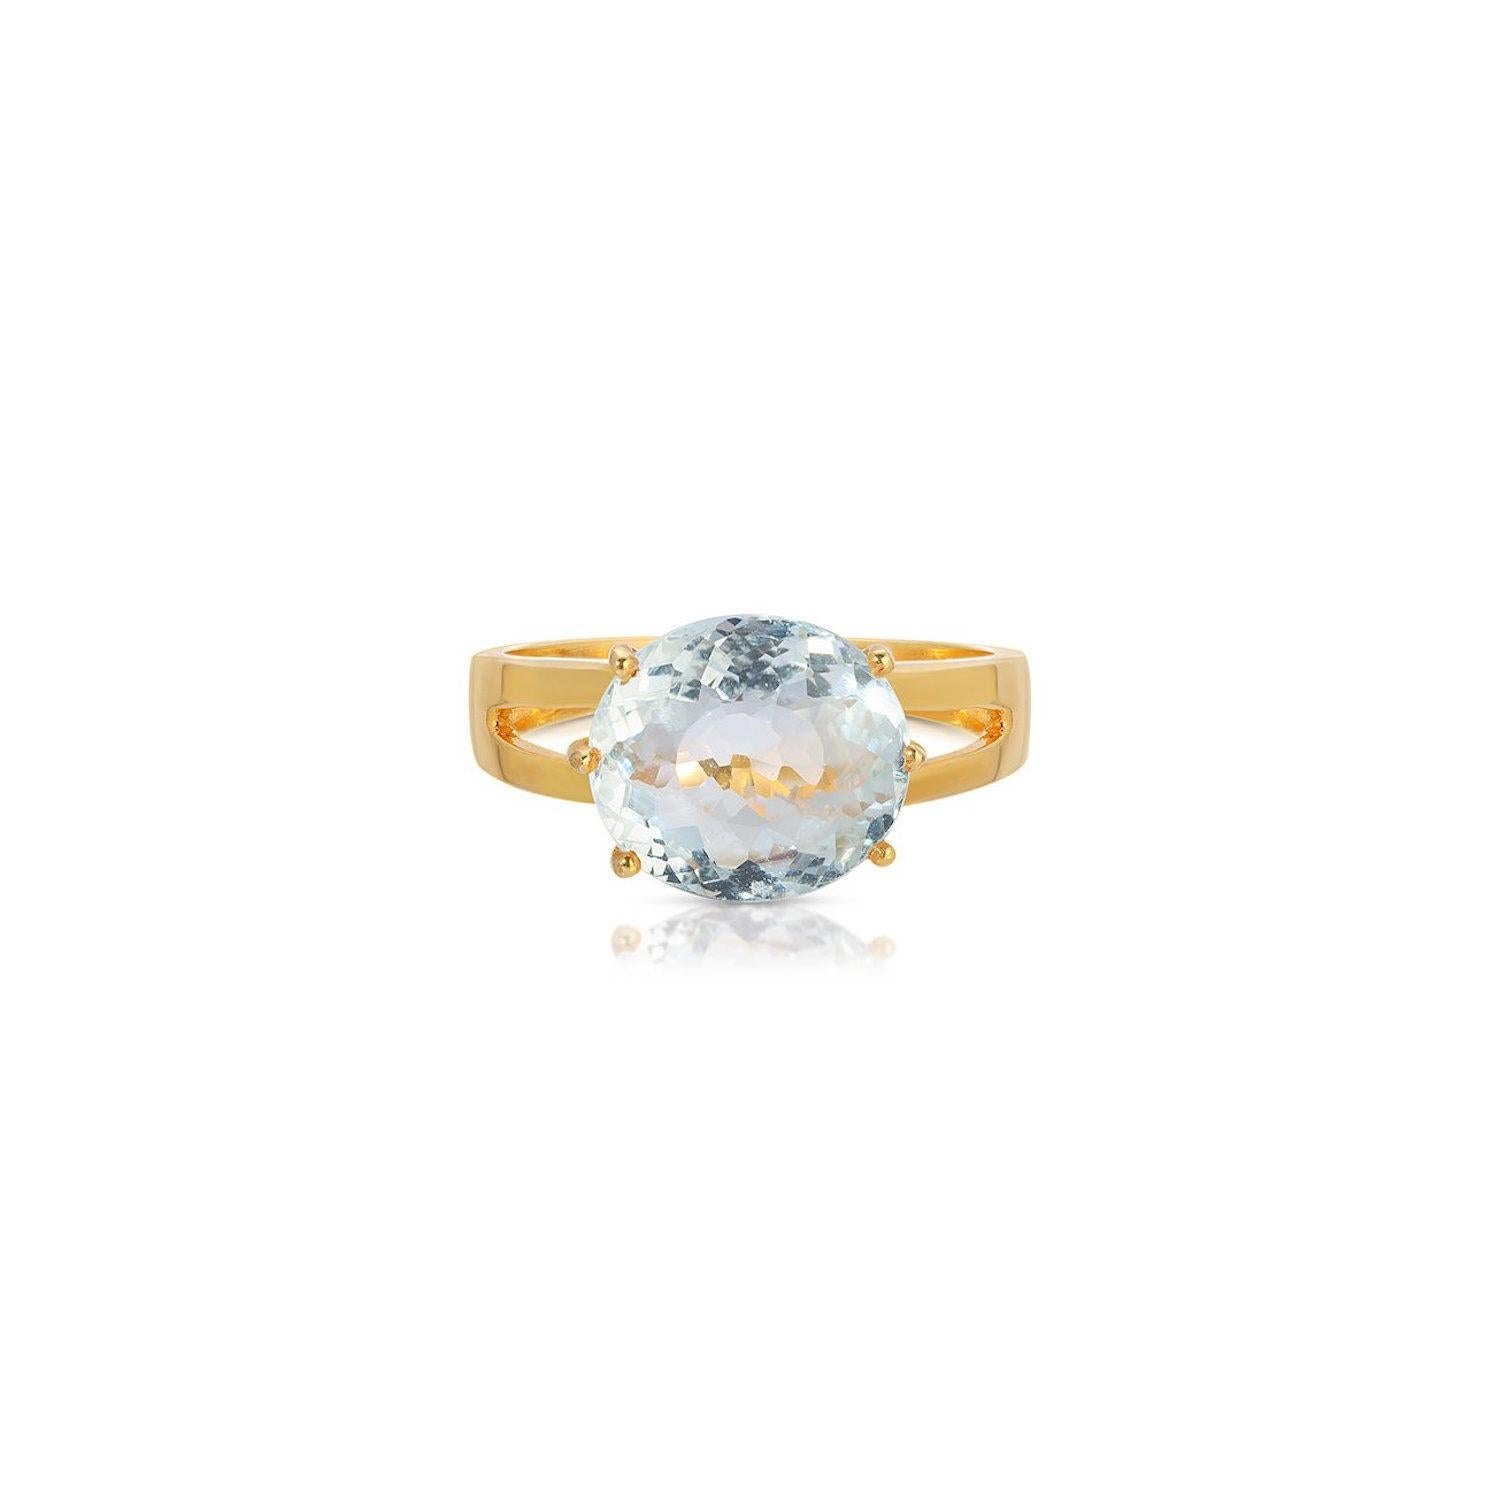 A gorgeous dress ring of modern design.  This ring features a beautiful 6.20 Carats ocean colored Aquamarine with a checker cut of exceptional luminosity.  This stylish dress ring is set in 22 Karat Gold overlay Silver.